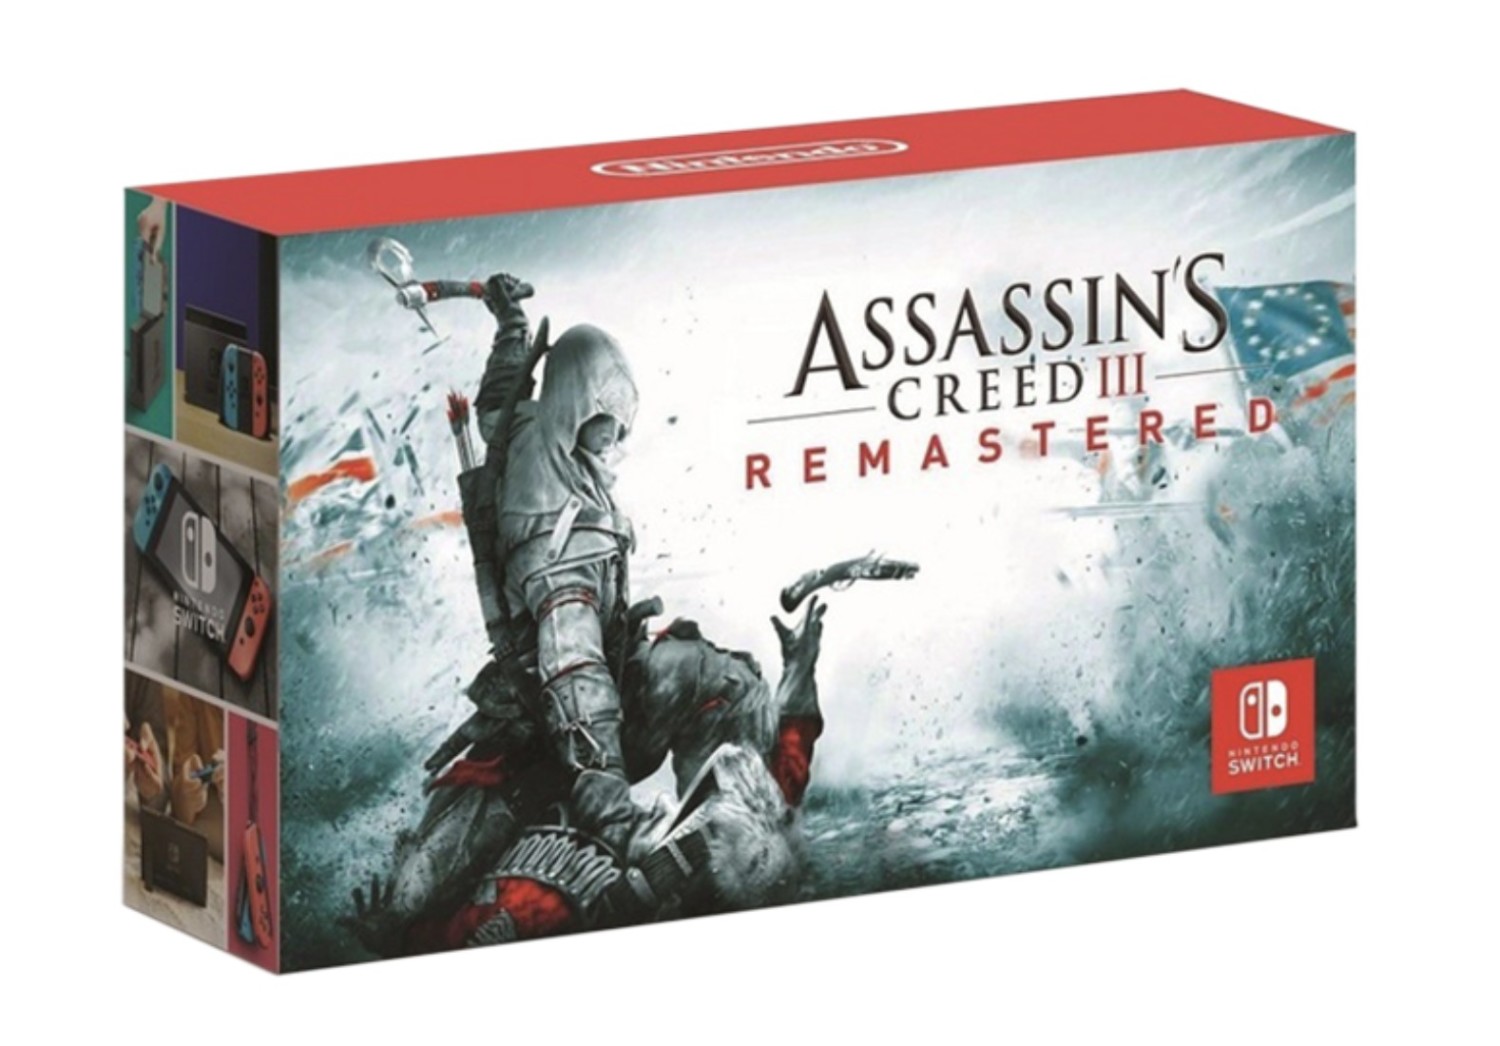 nintendo-switch-assassin-s-creed-iii-remastered-and-just-dance-2020